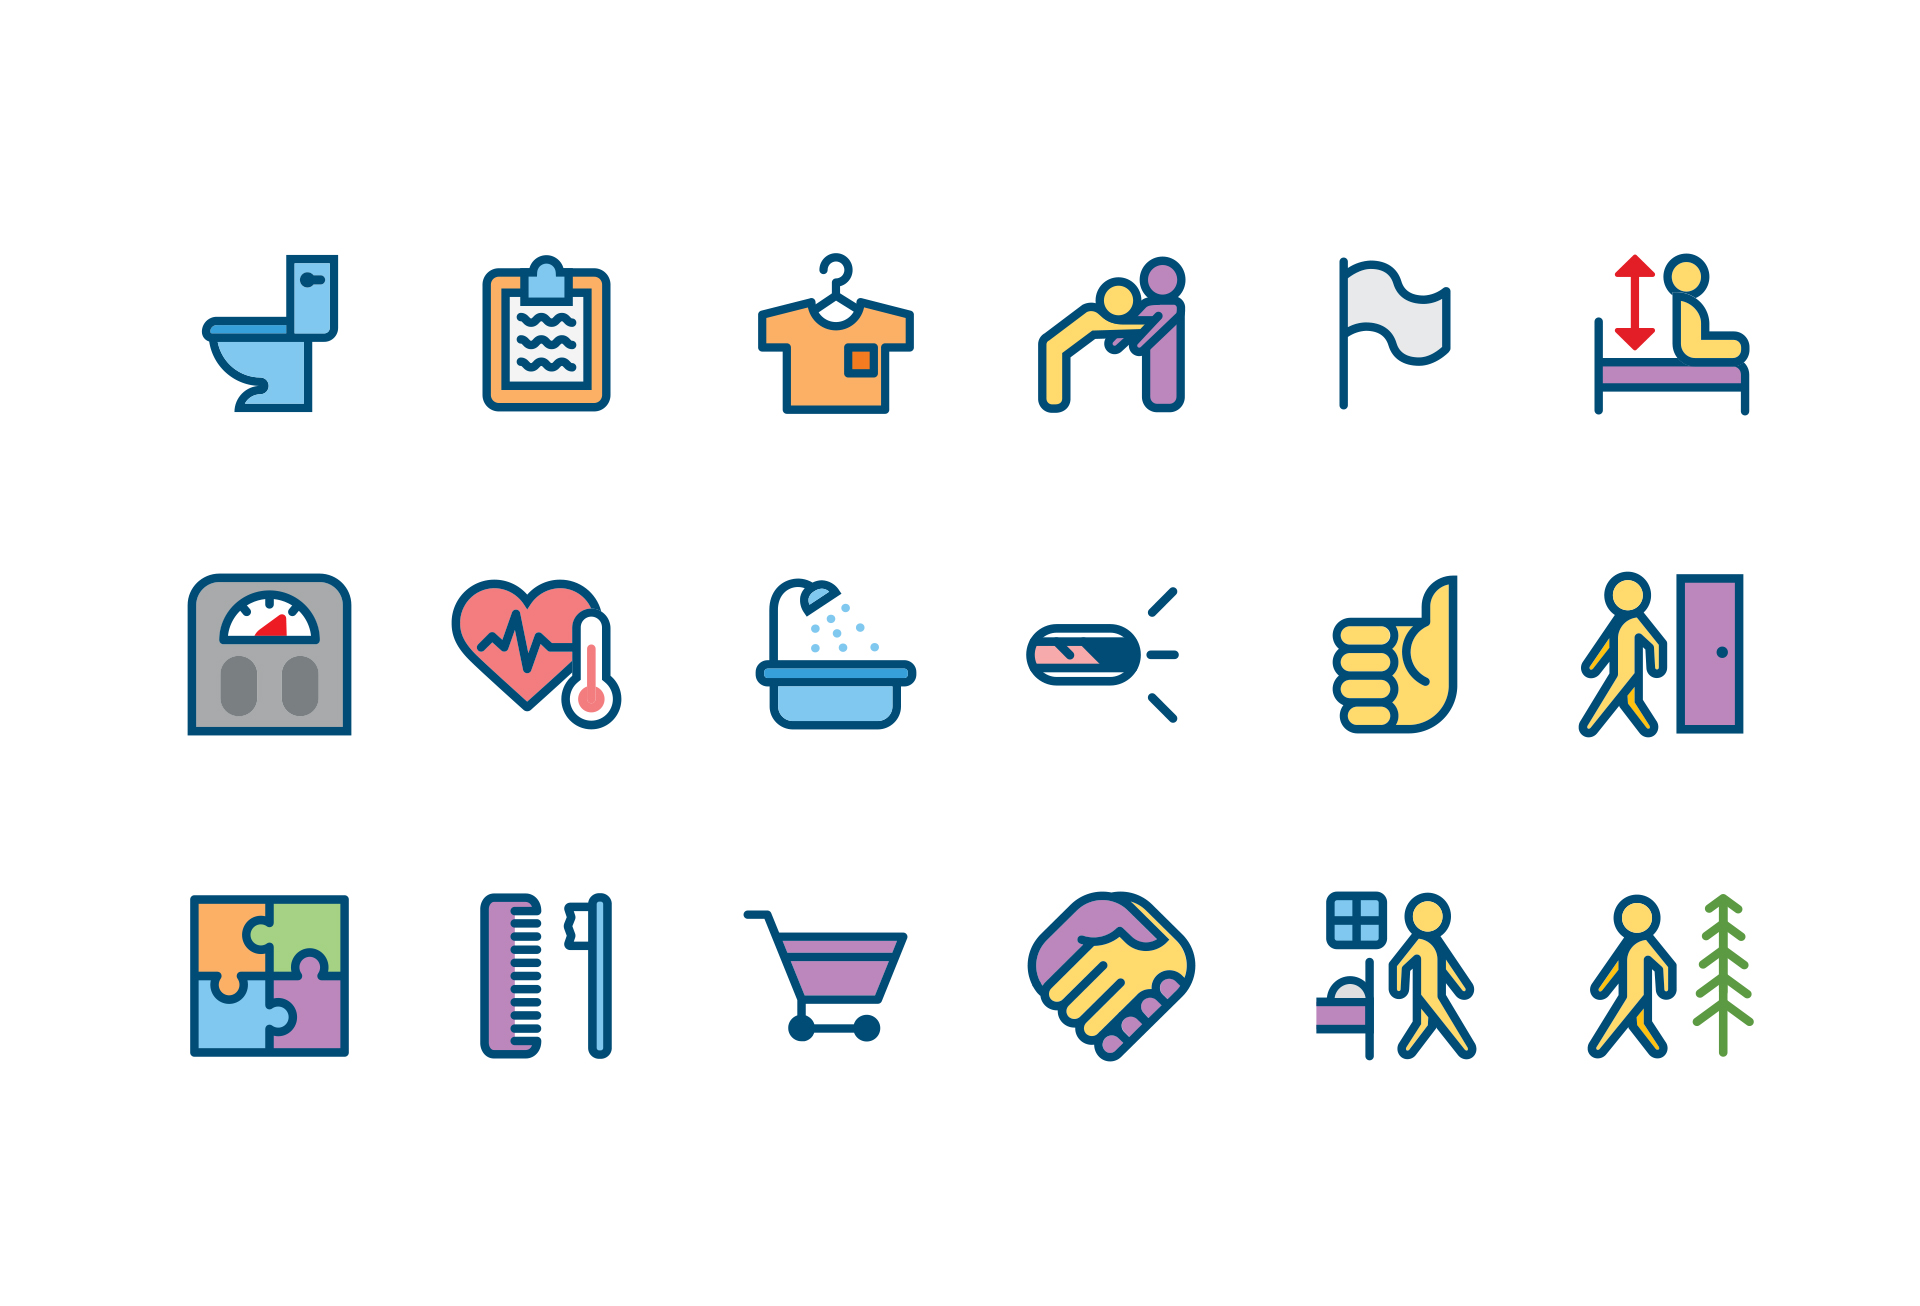  I created an icon design system to replace 50+ symbols used in an app for tracking the health of long term care patients. Each one is big, bold, and unique to make manual data entry quick and easy. 